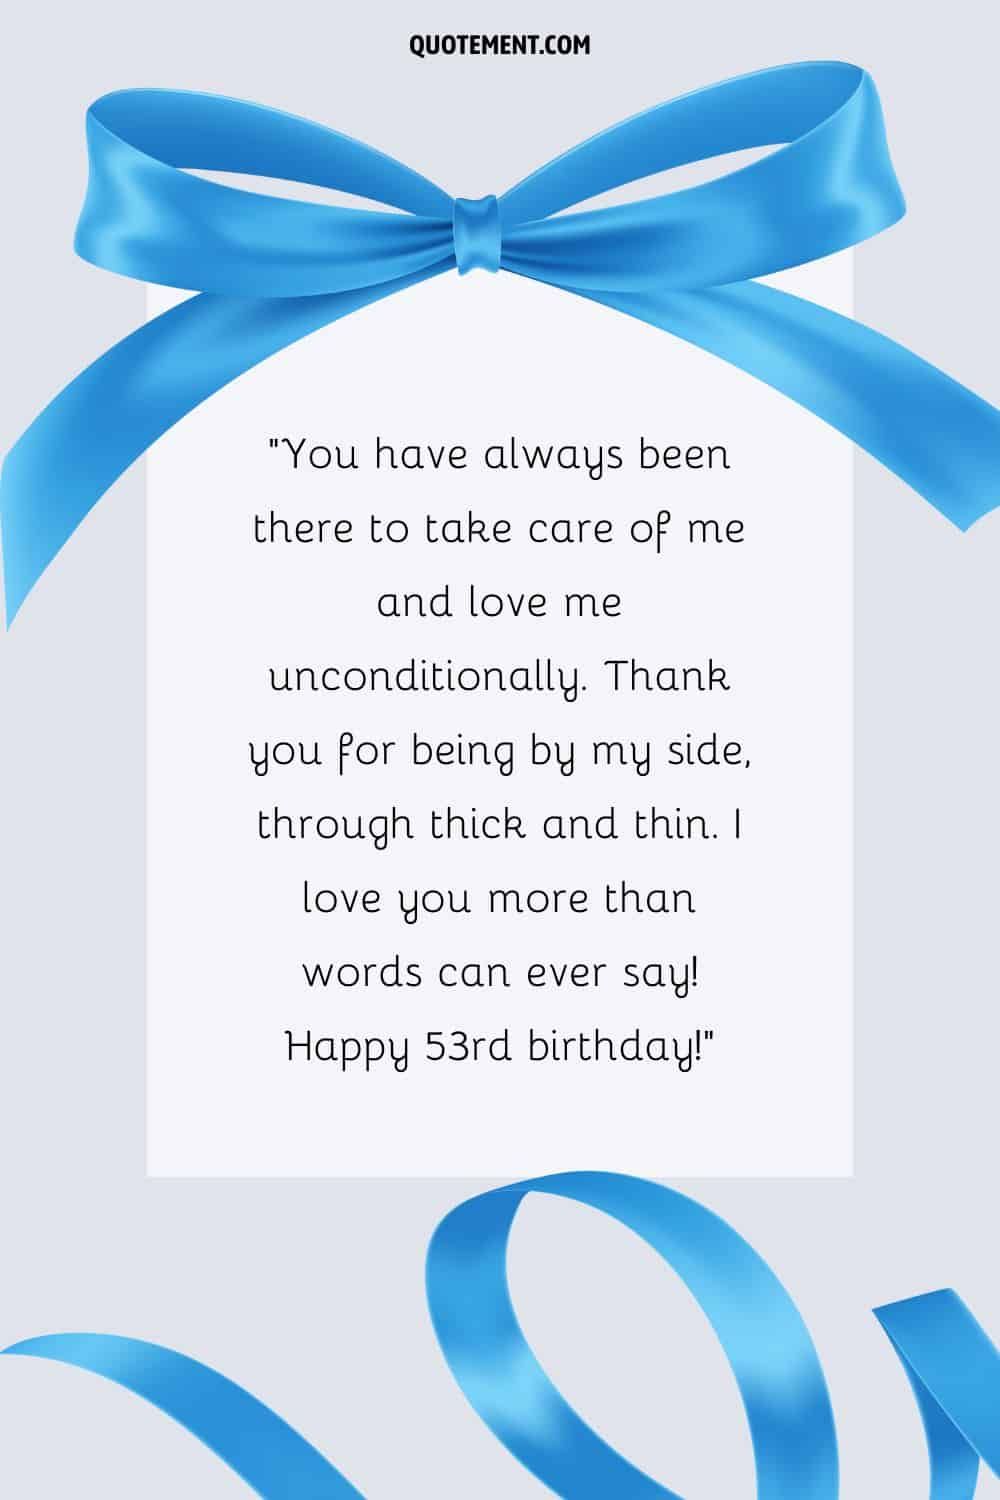 Heartwarming message for a husband who turns 53 and a blue ribbon